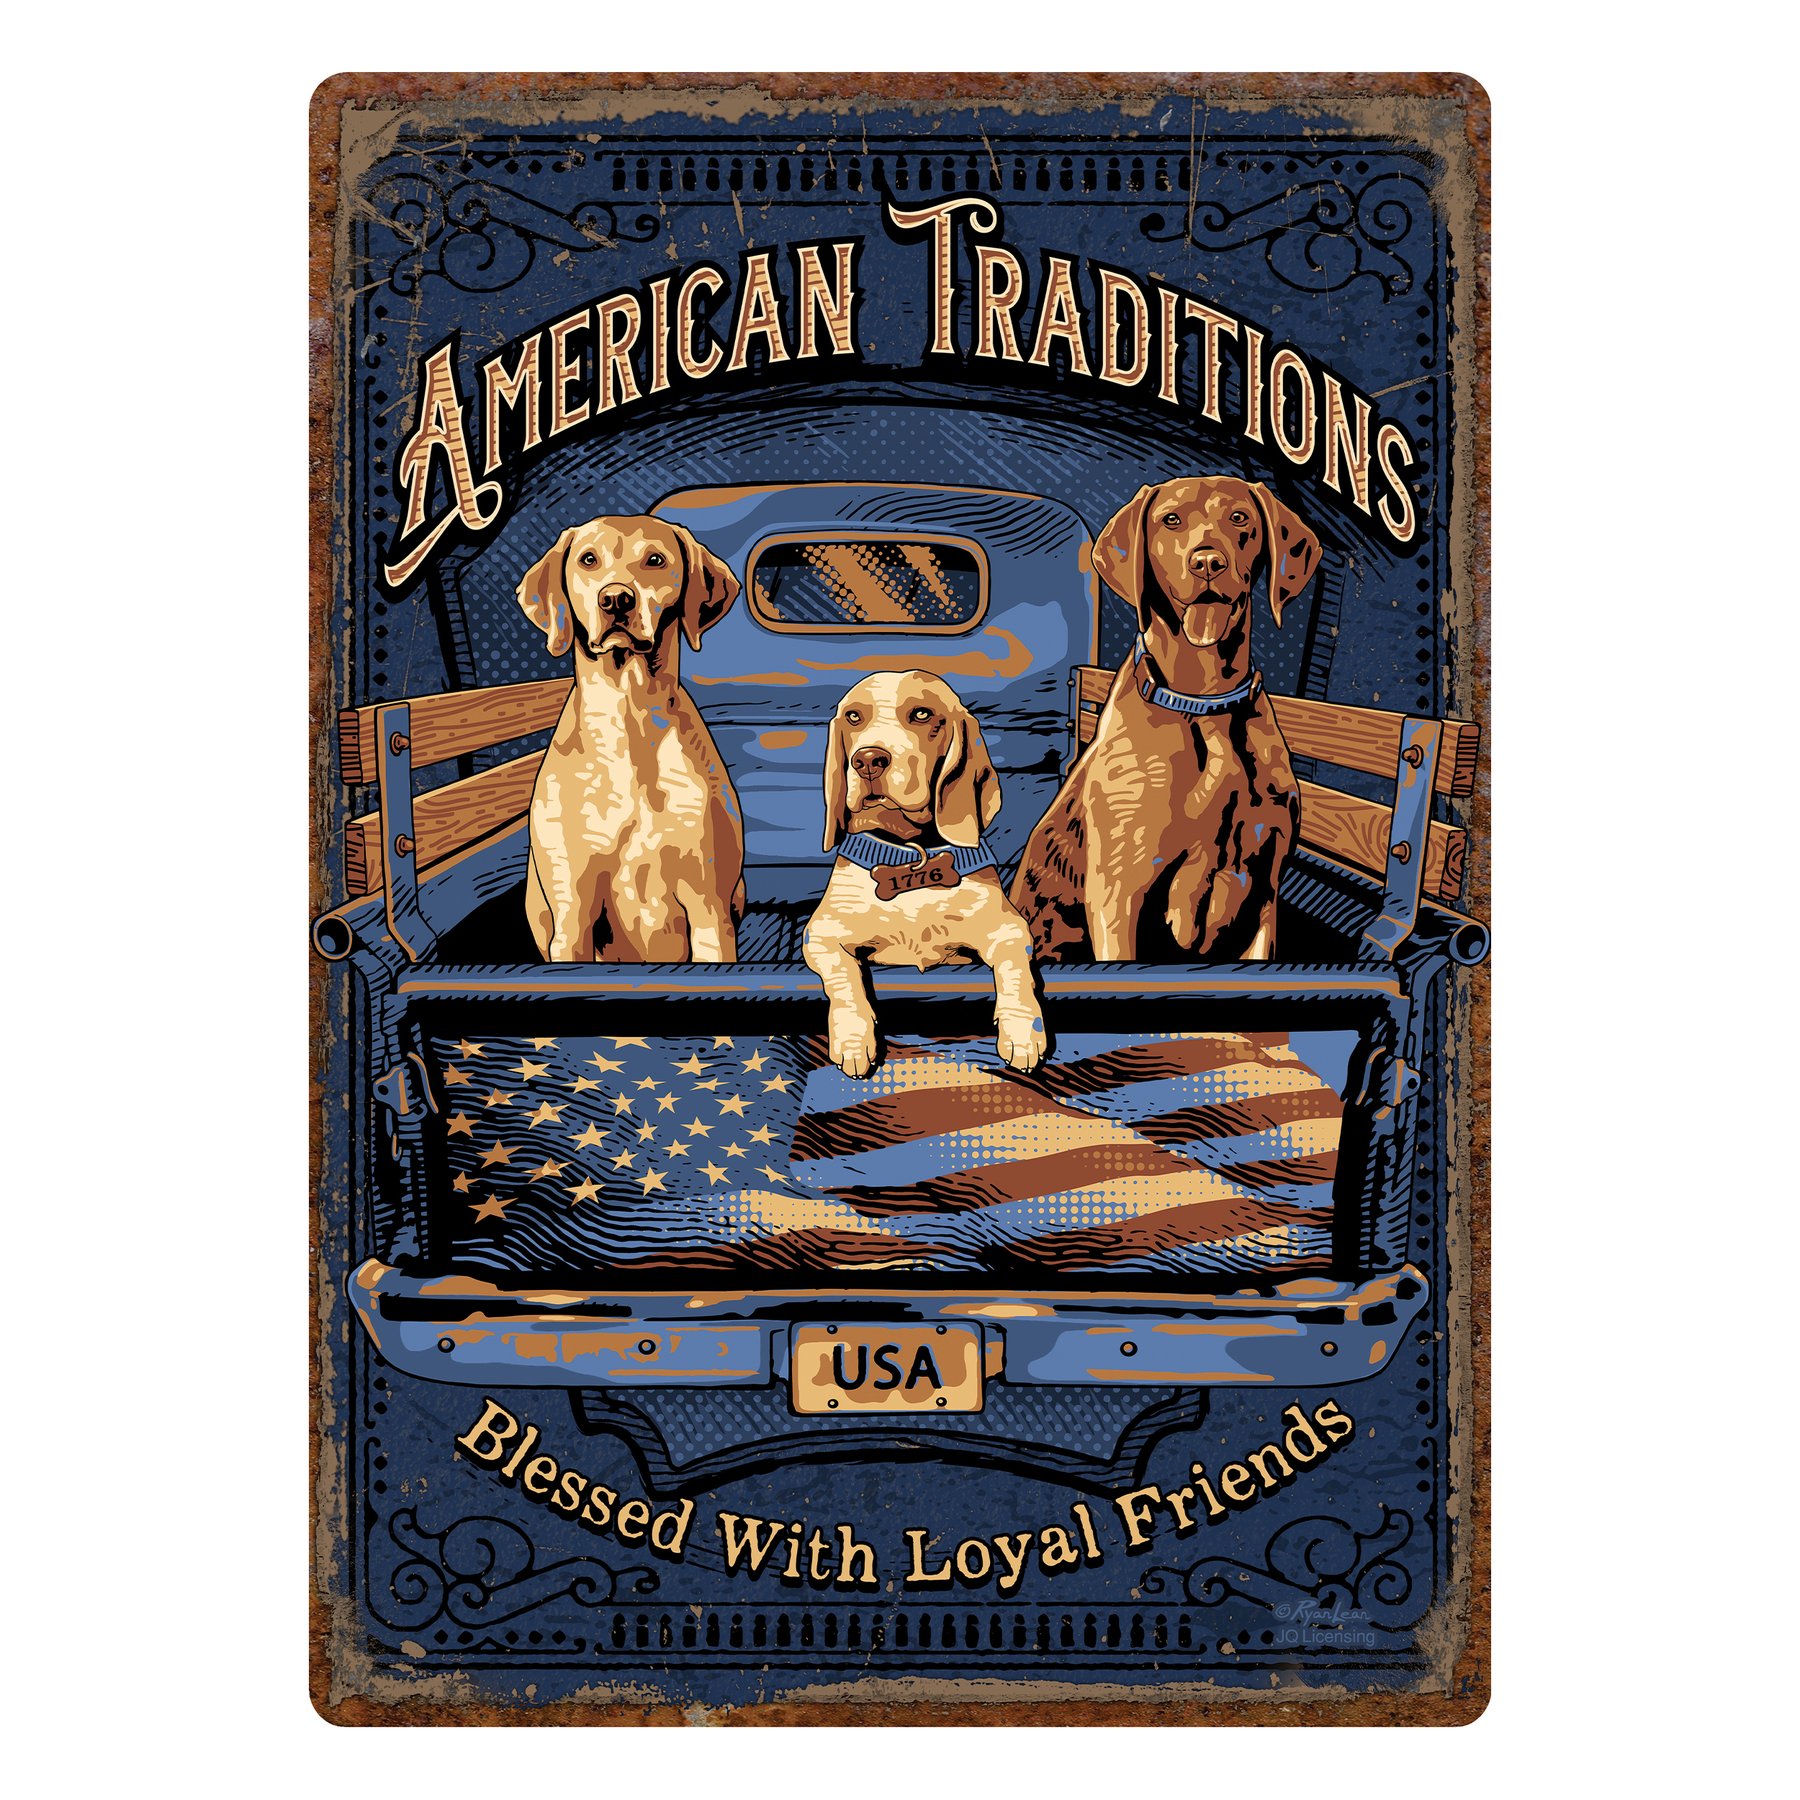 TIN SIGN 12IN X 17IN - AMERICAN TRADITION DOGS